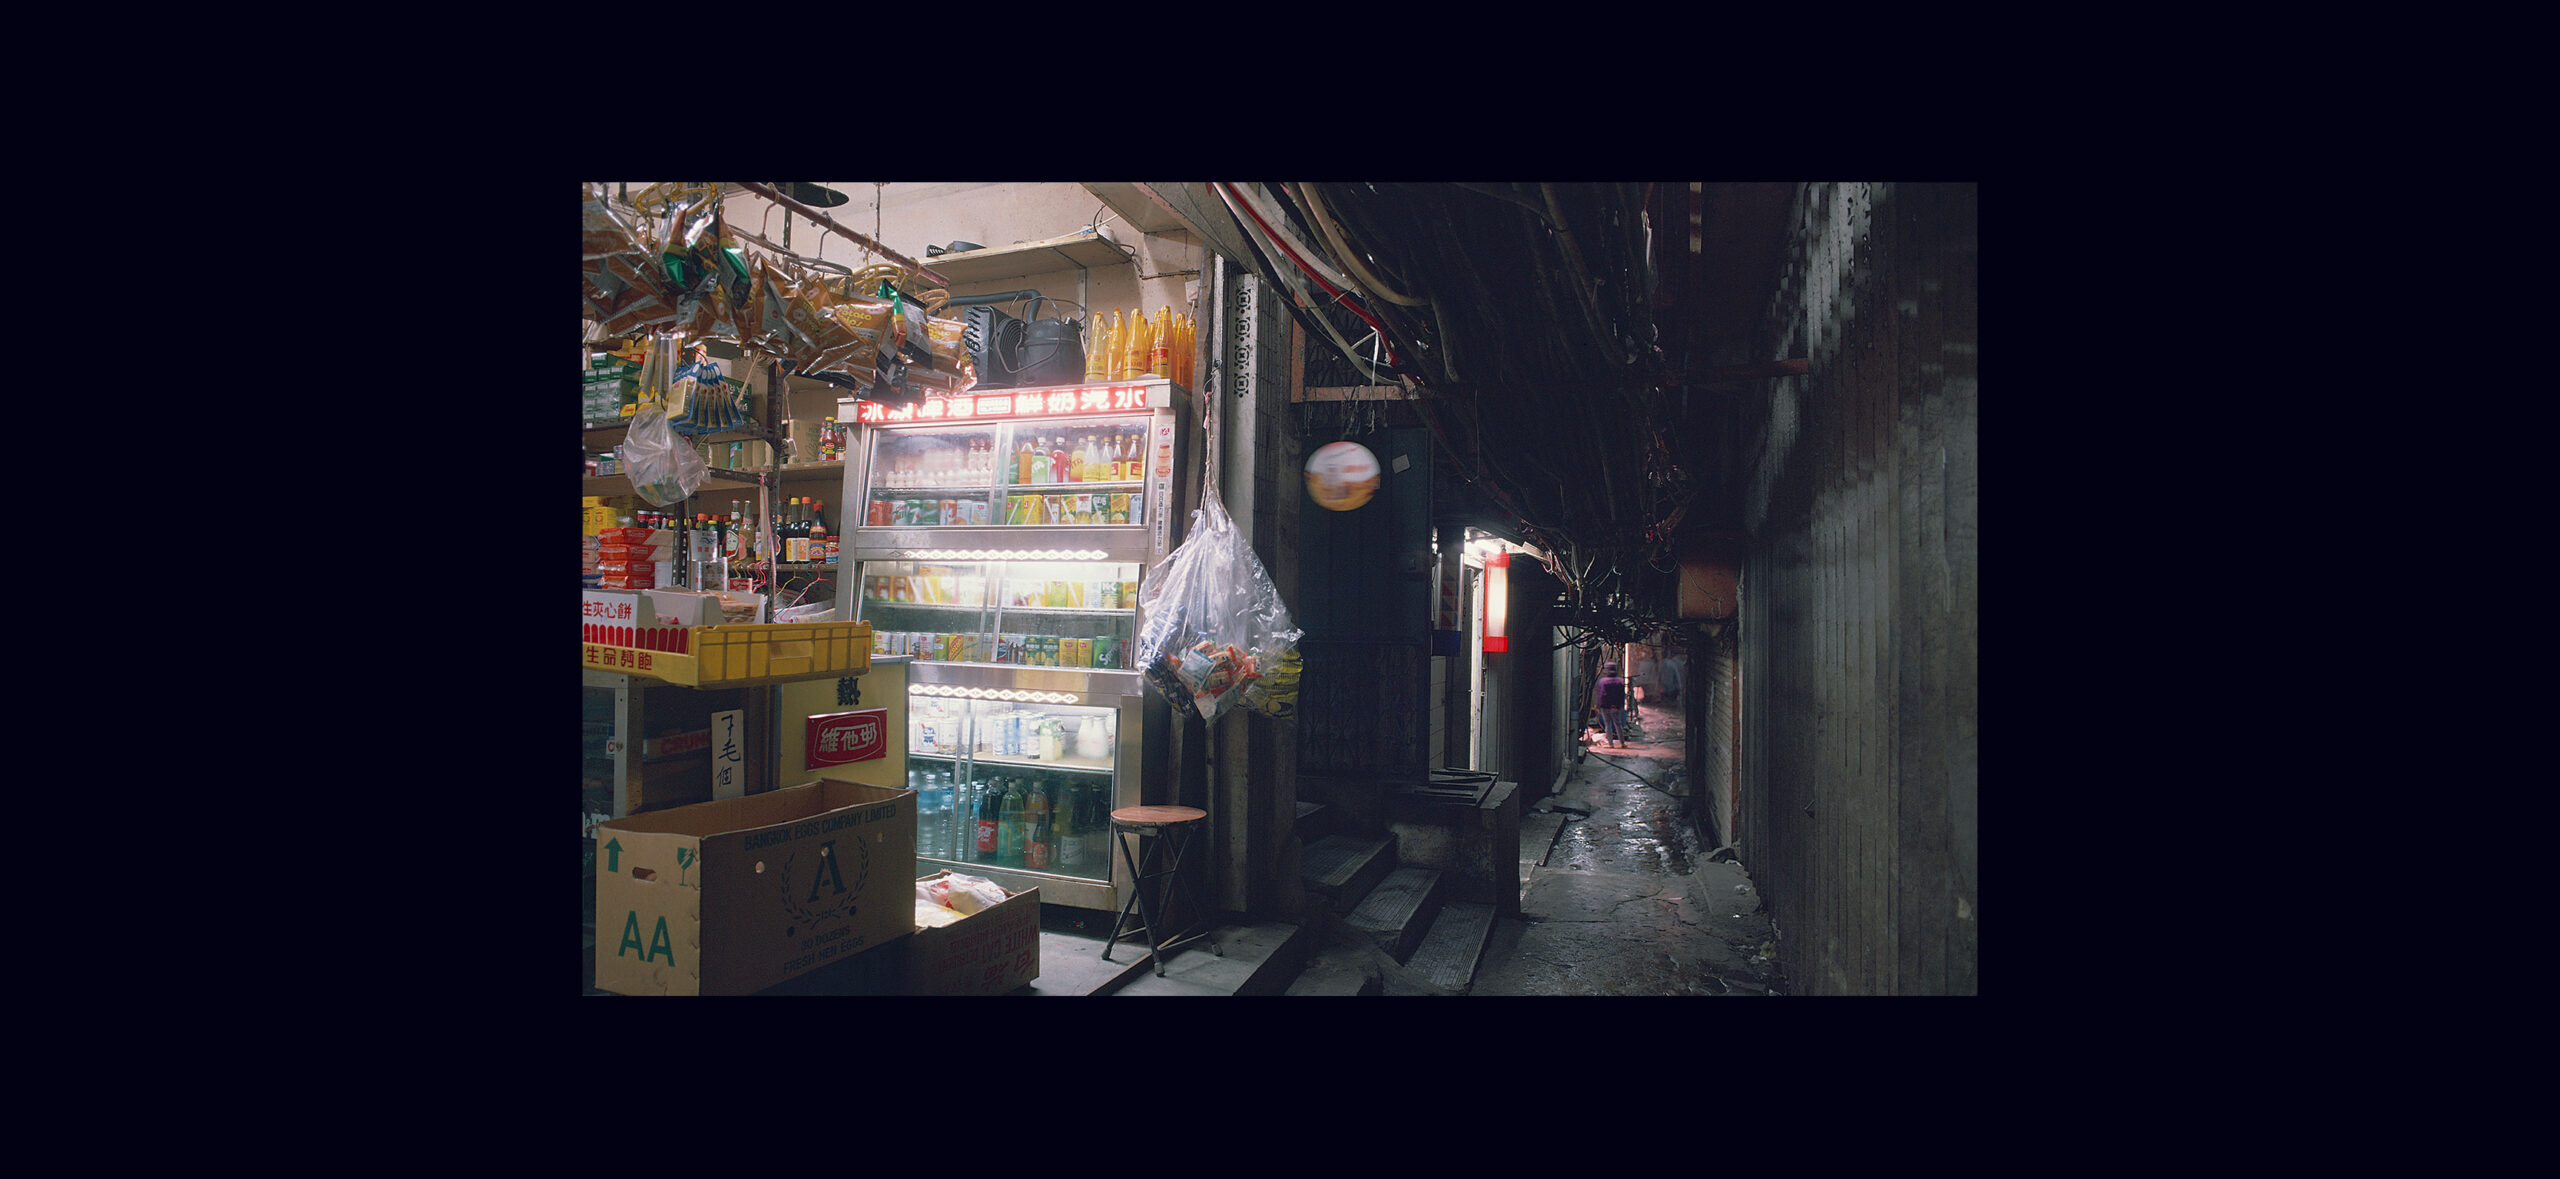 Kowloon Walled City — corner store and alley